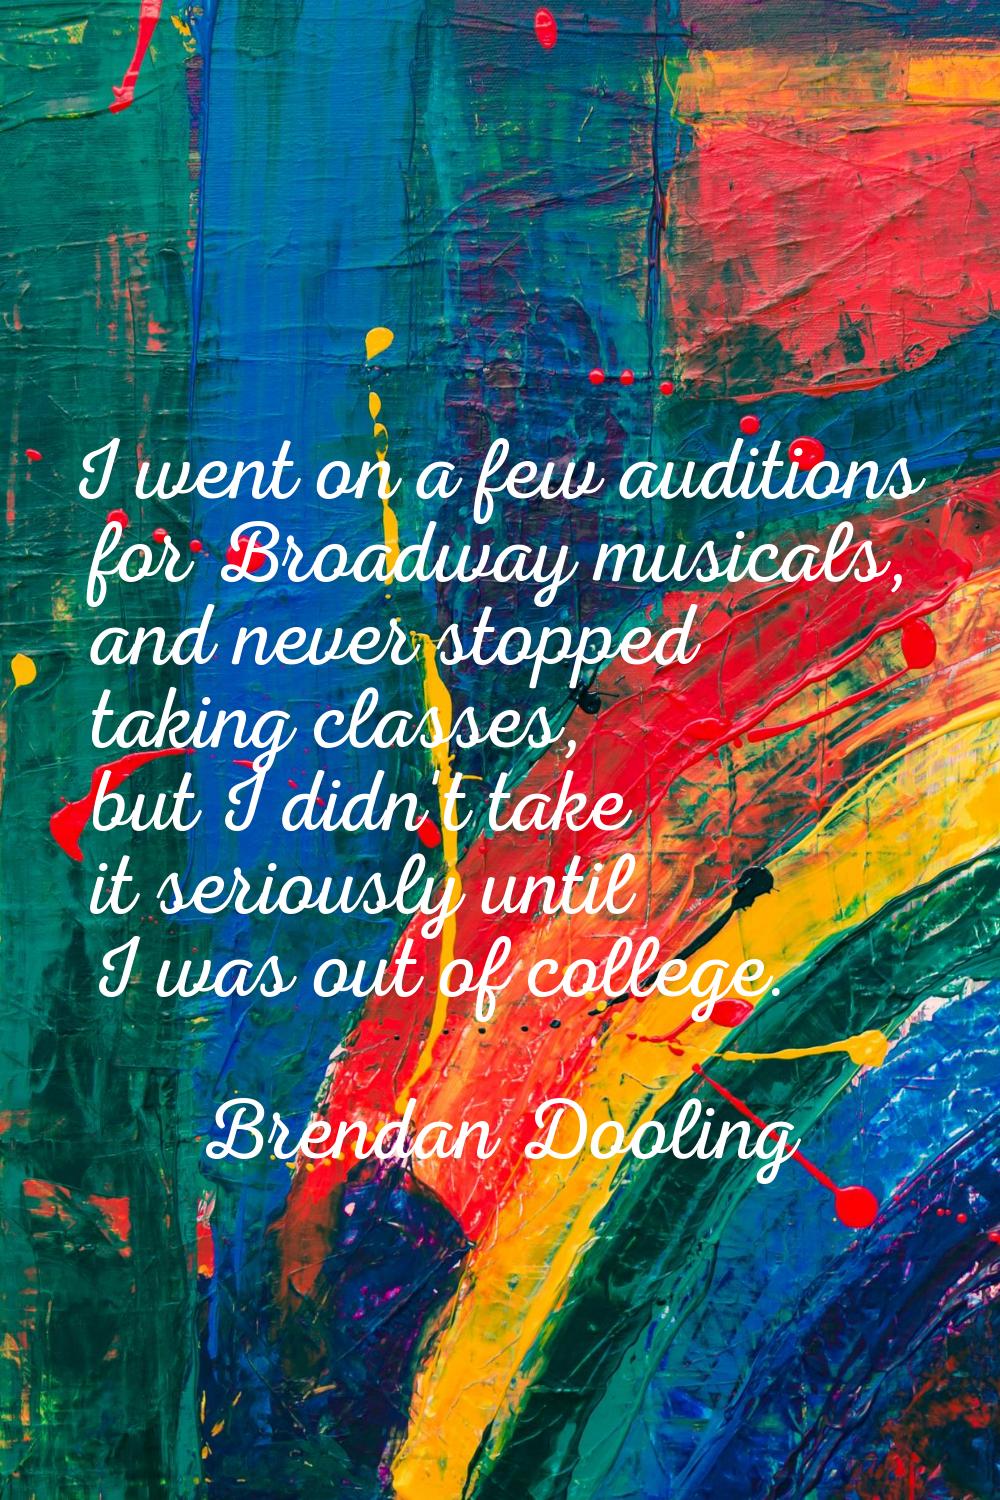 I went on a few auditions for Broadway musicals, and never stopped taking classes, but I didn't tak